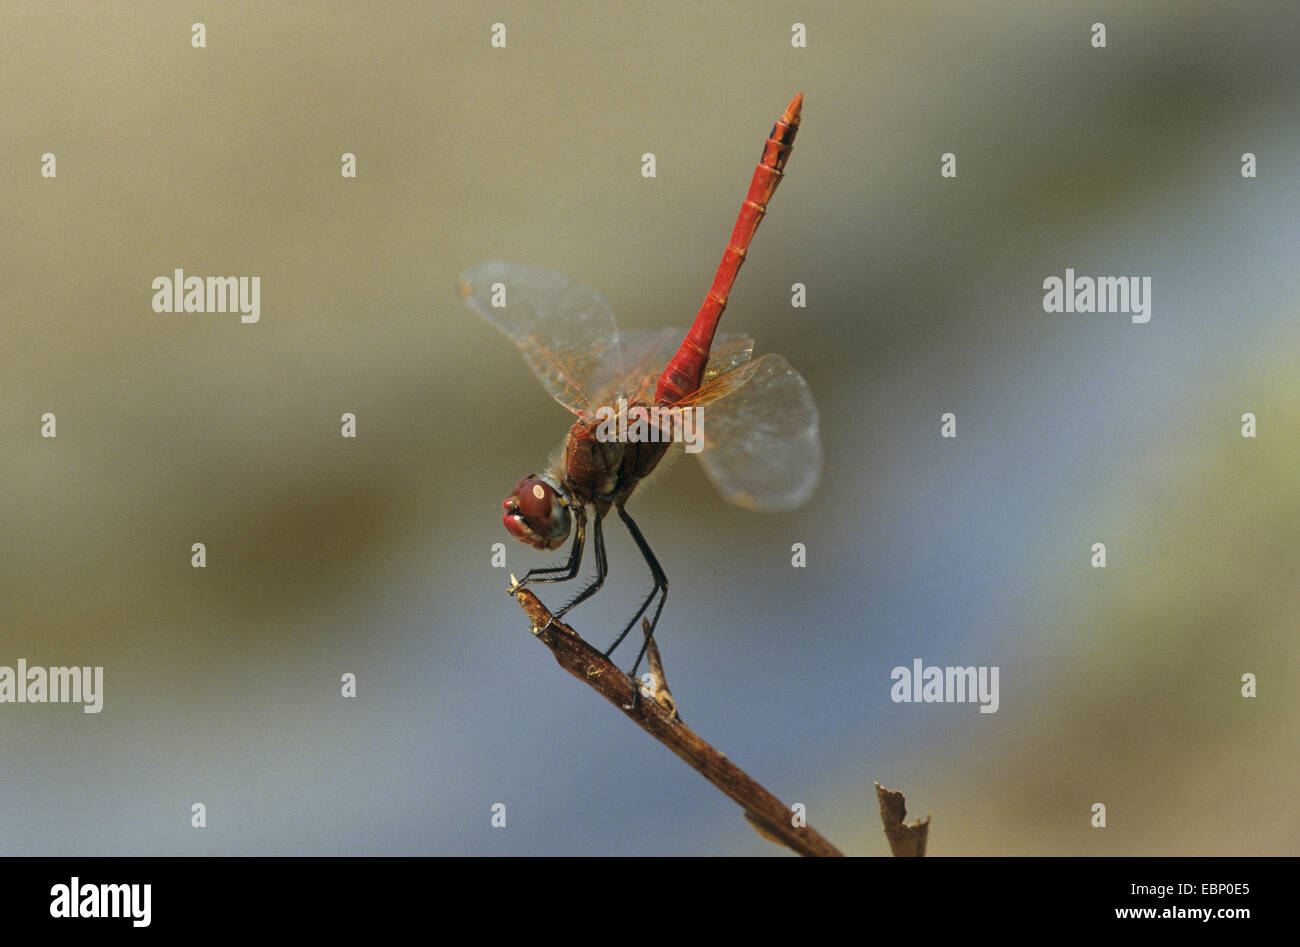 Red-veined sympetrum (Sympetrum fonscolombii, Sympetrum fonscolombei), male in obelisk position, Germany Stock Photo